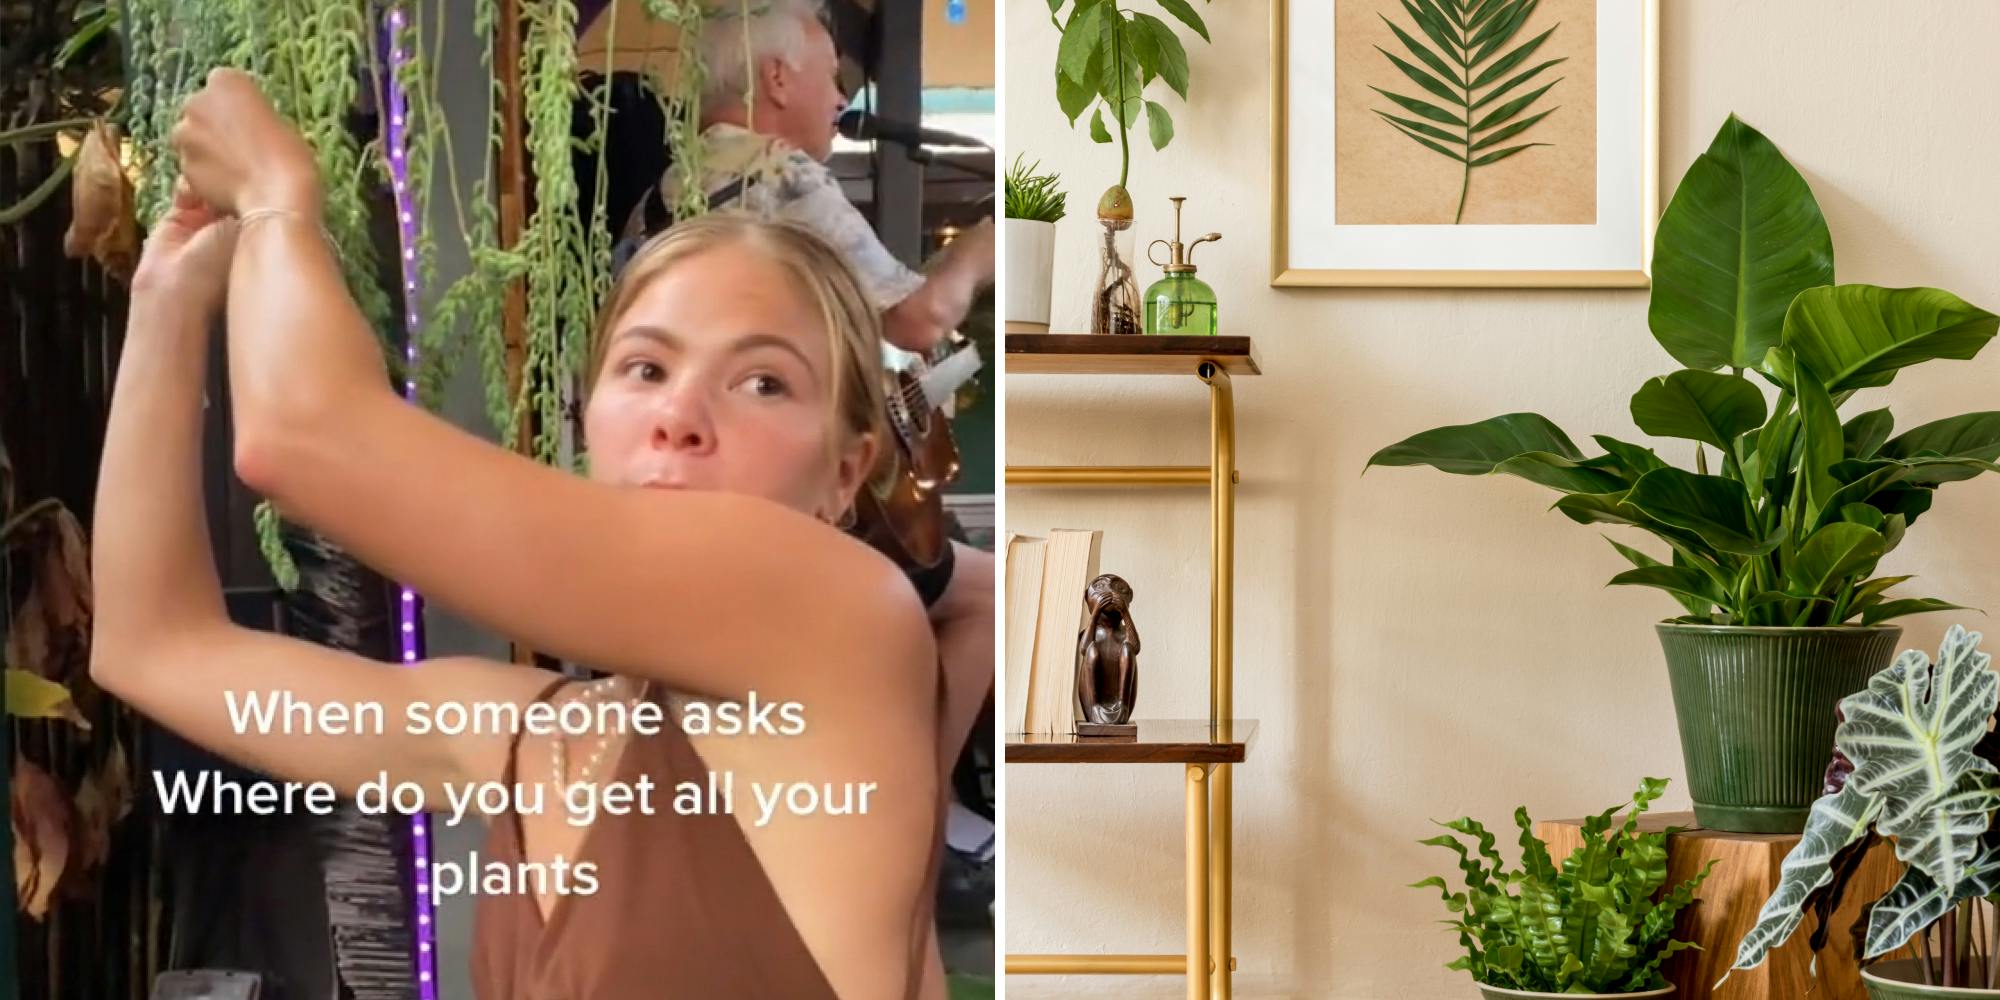 woman reaching up to plant taking a piece of it caption "When someone asks Where do you get all your plants" (l) Plants in trendy room tan (r)